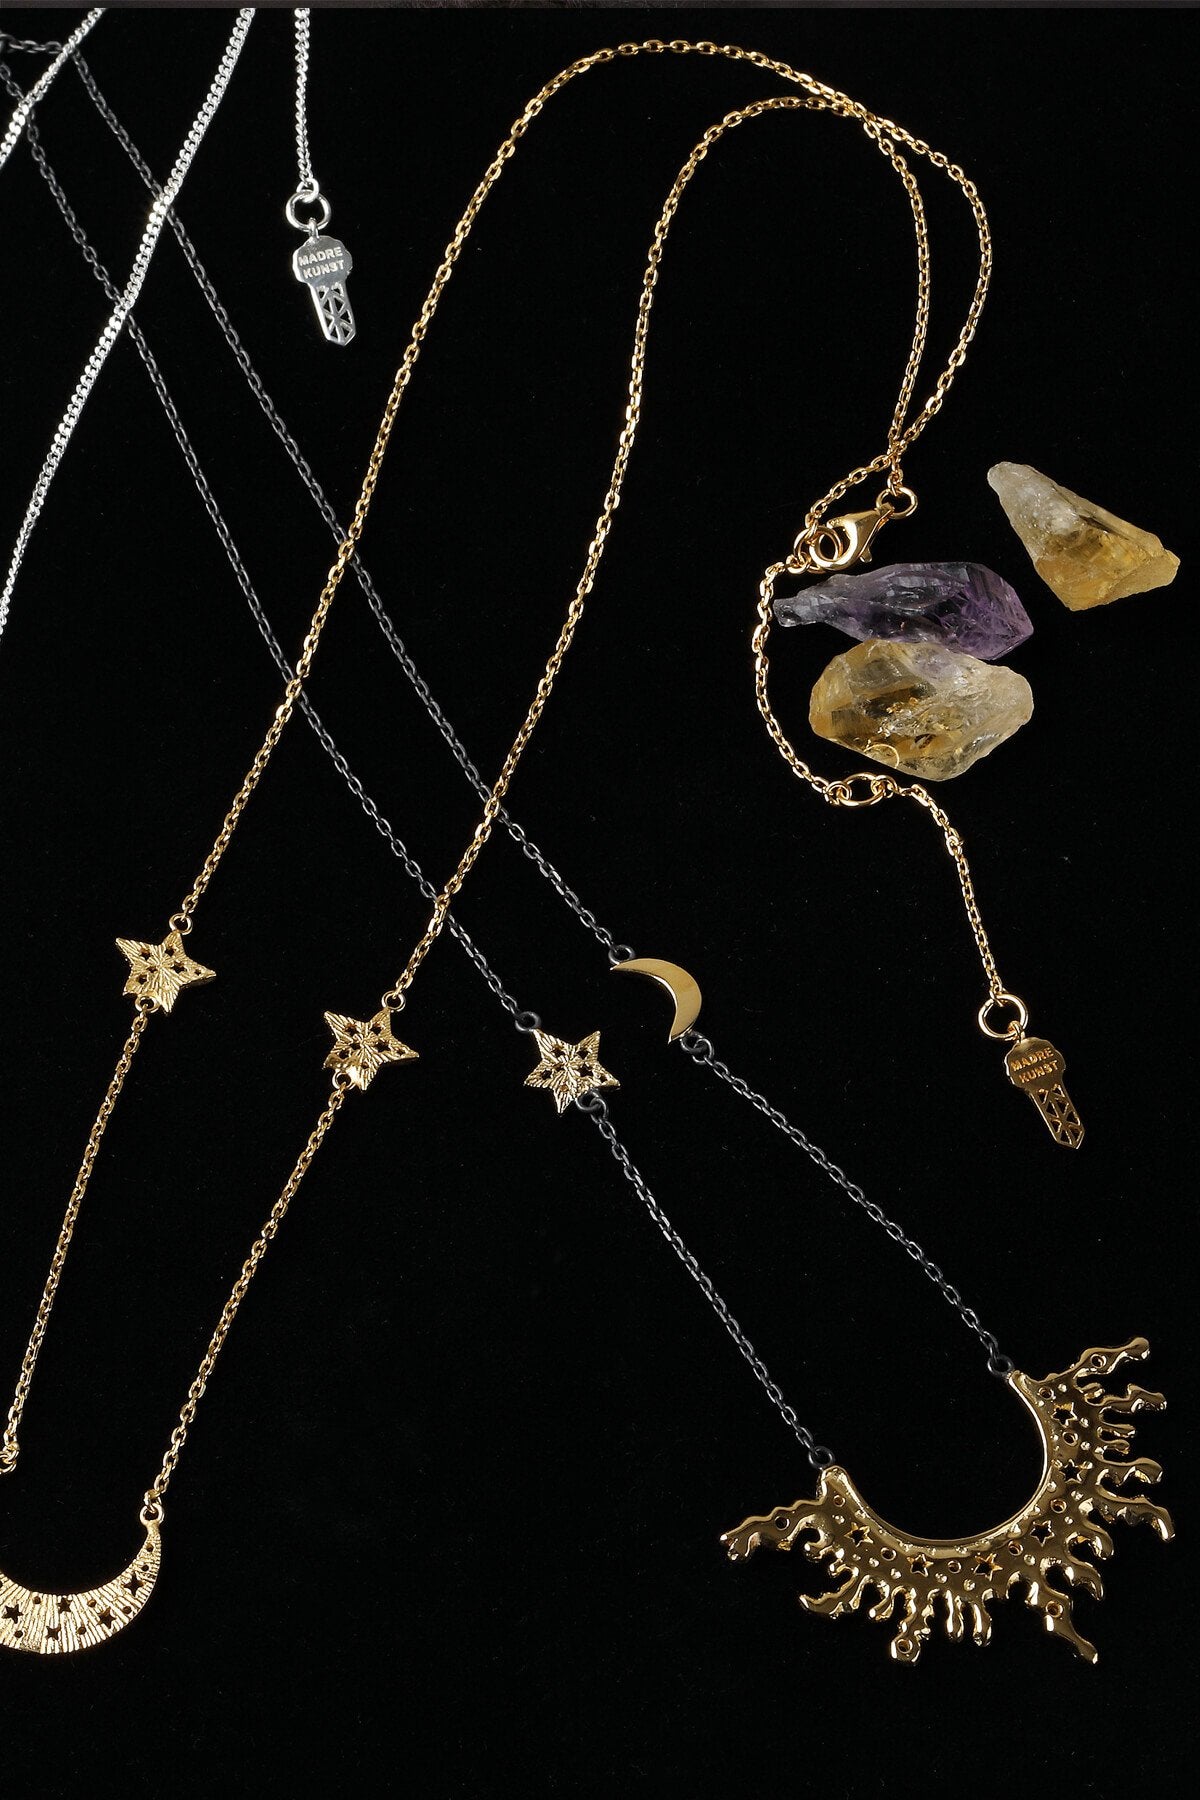 Half Sun with Star and Moon on the chain necklace. Silver, gold-plated, oxidized